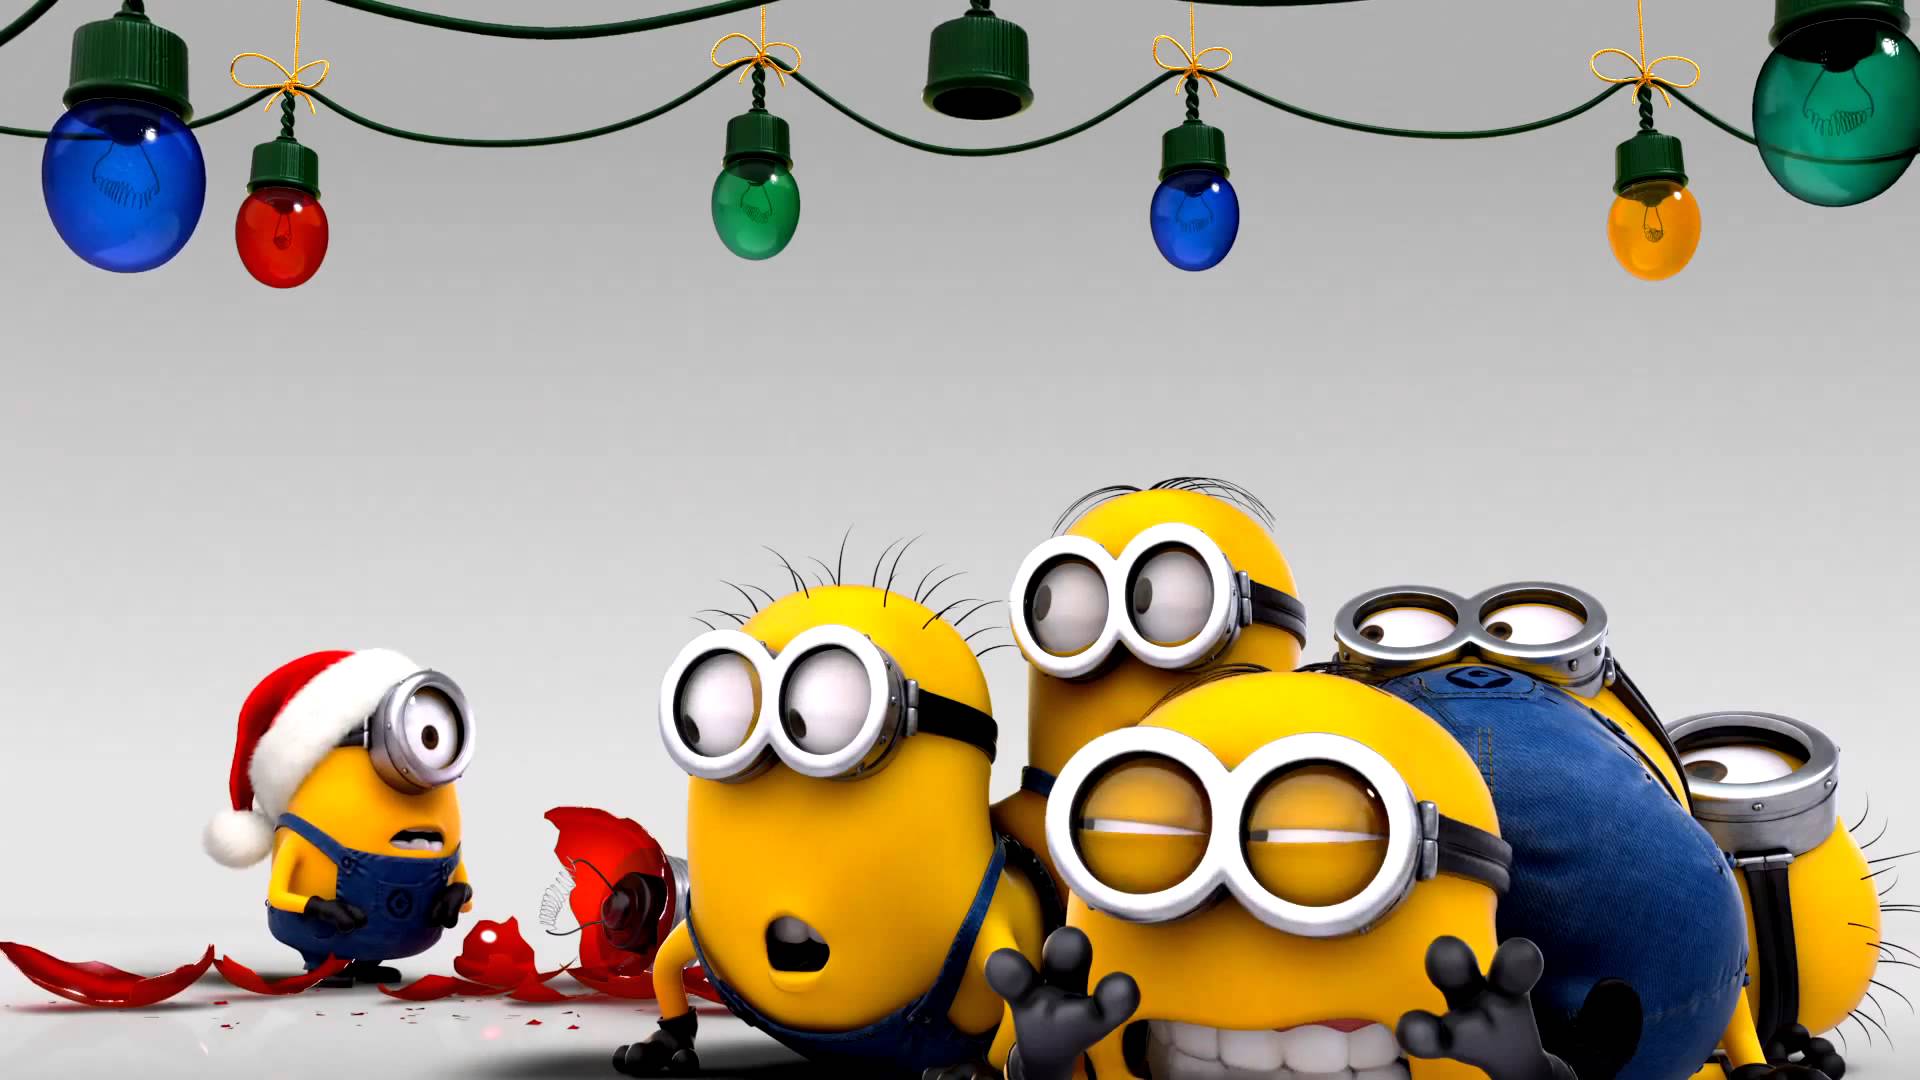 Image from http://umbrelr.com/wp-content/uploads/2014/02/Minion ...